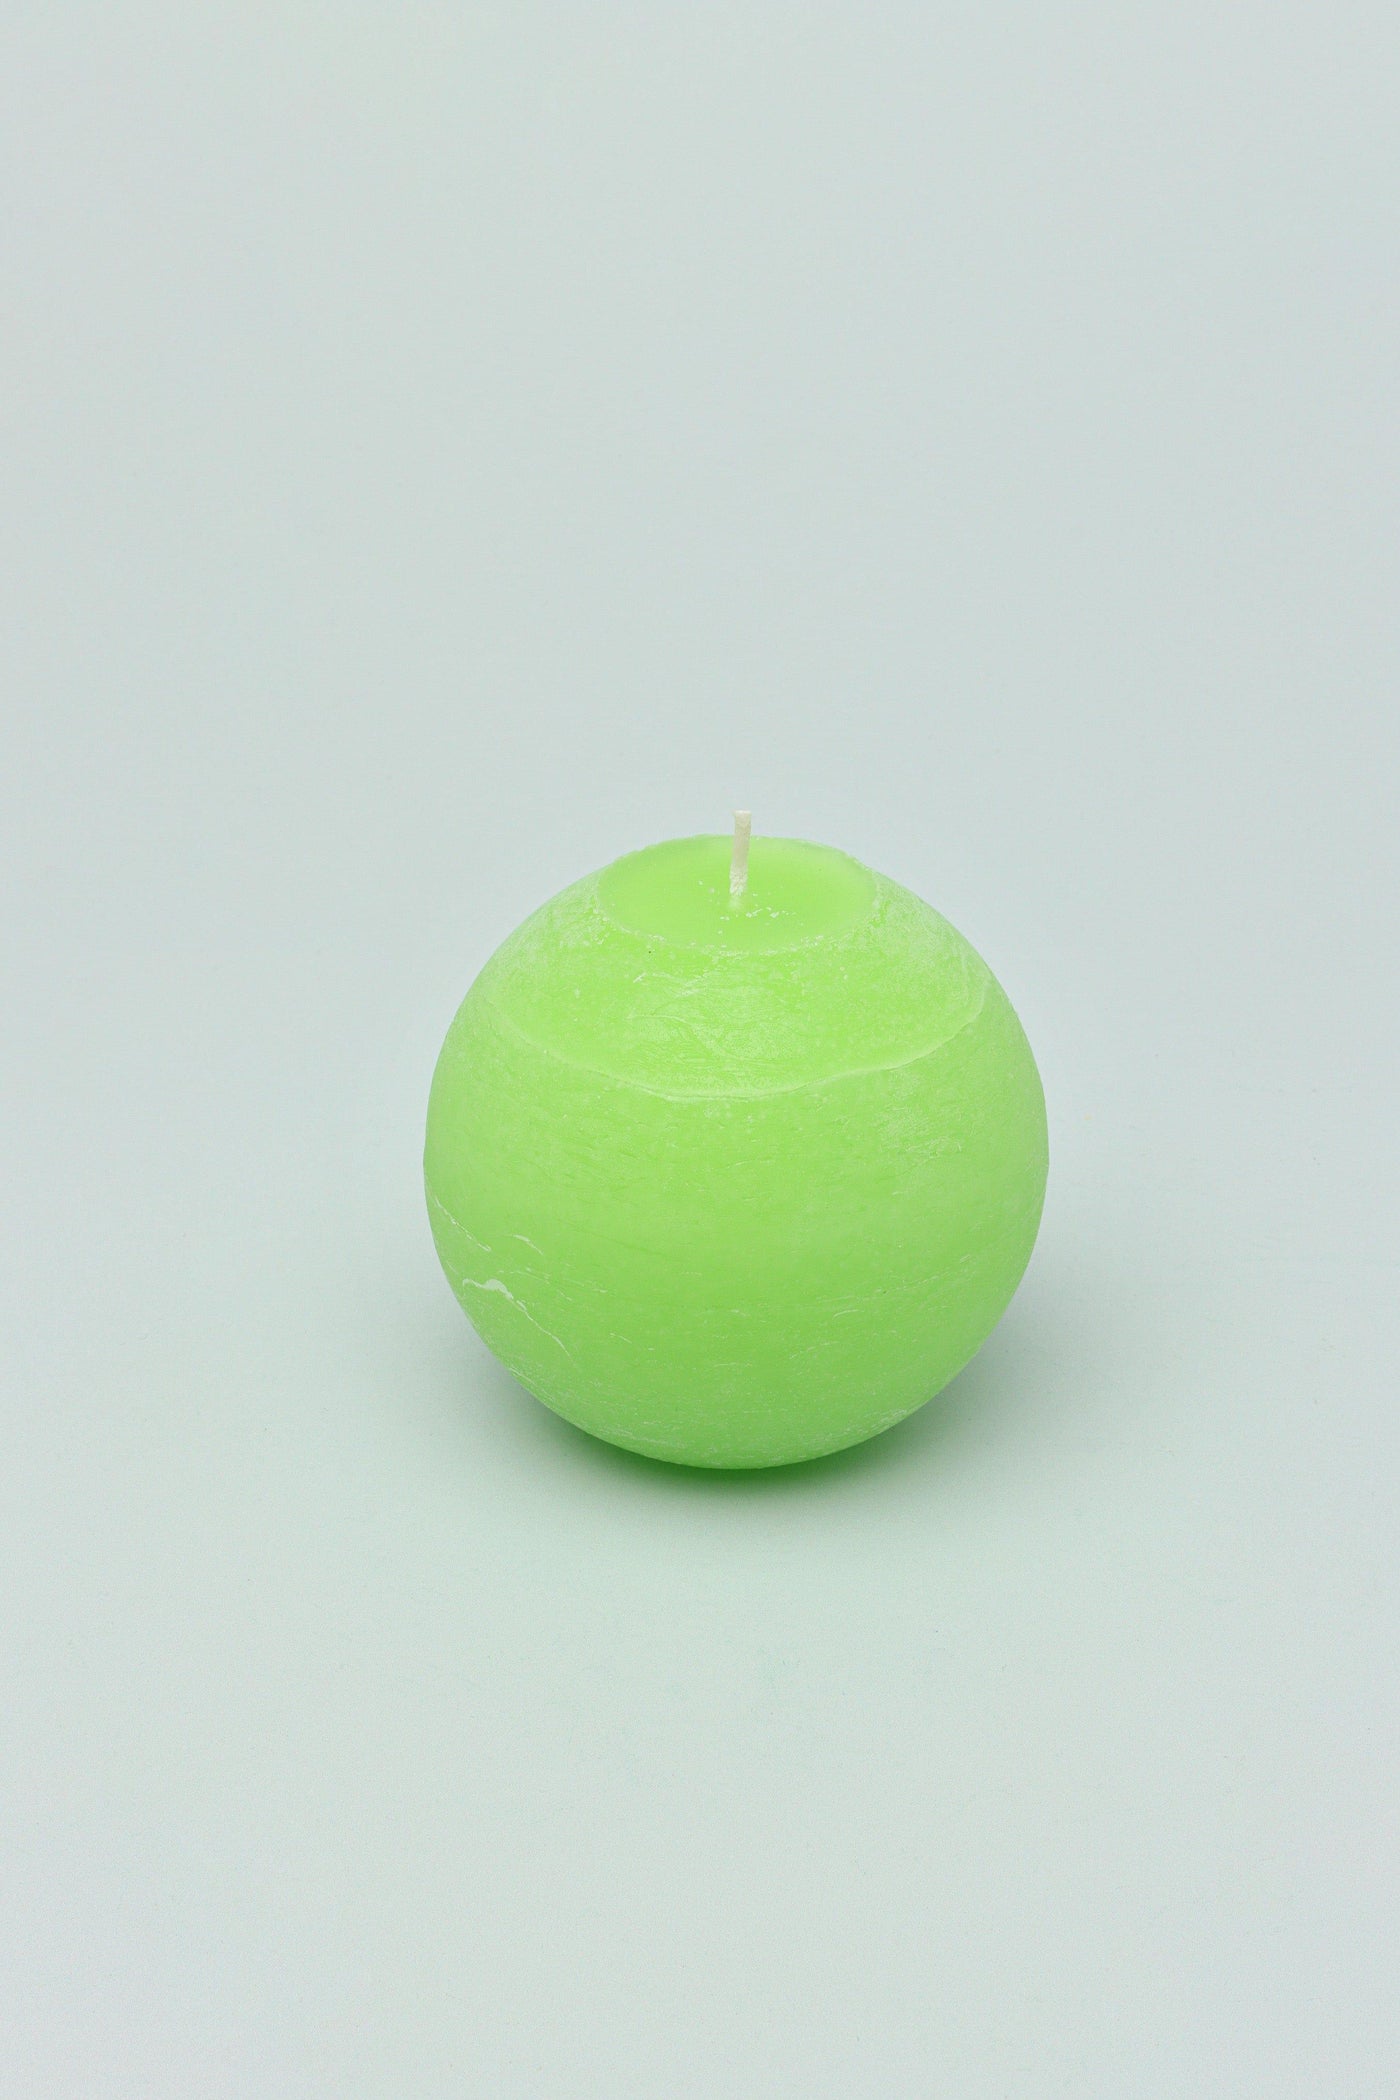 G Decor Candles & Candle Holders Large Ball Georgia Lime Green Ombre Sphere Ball Candles